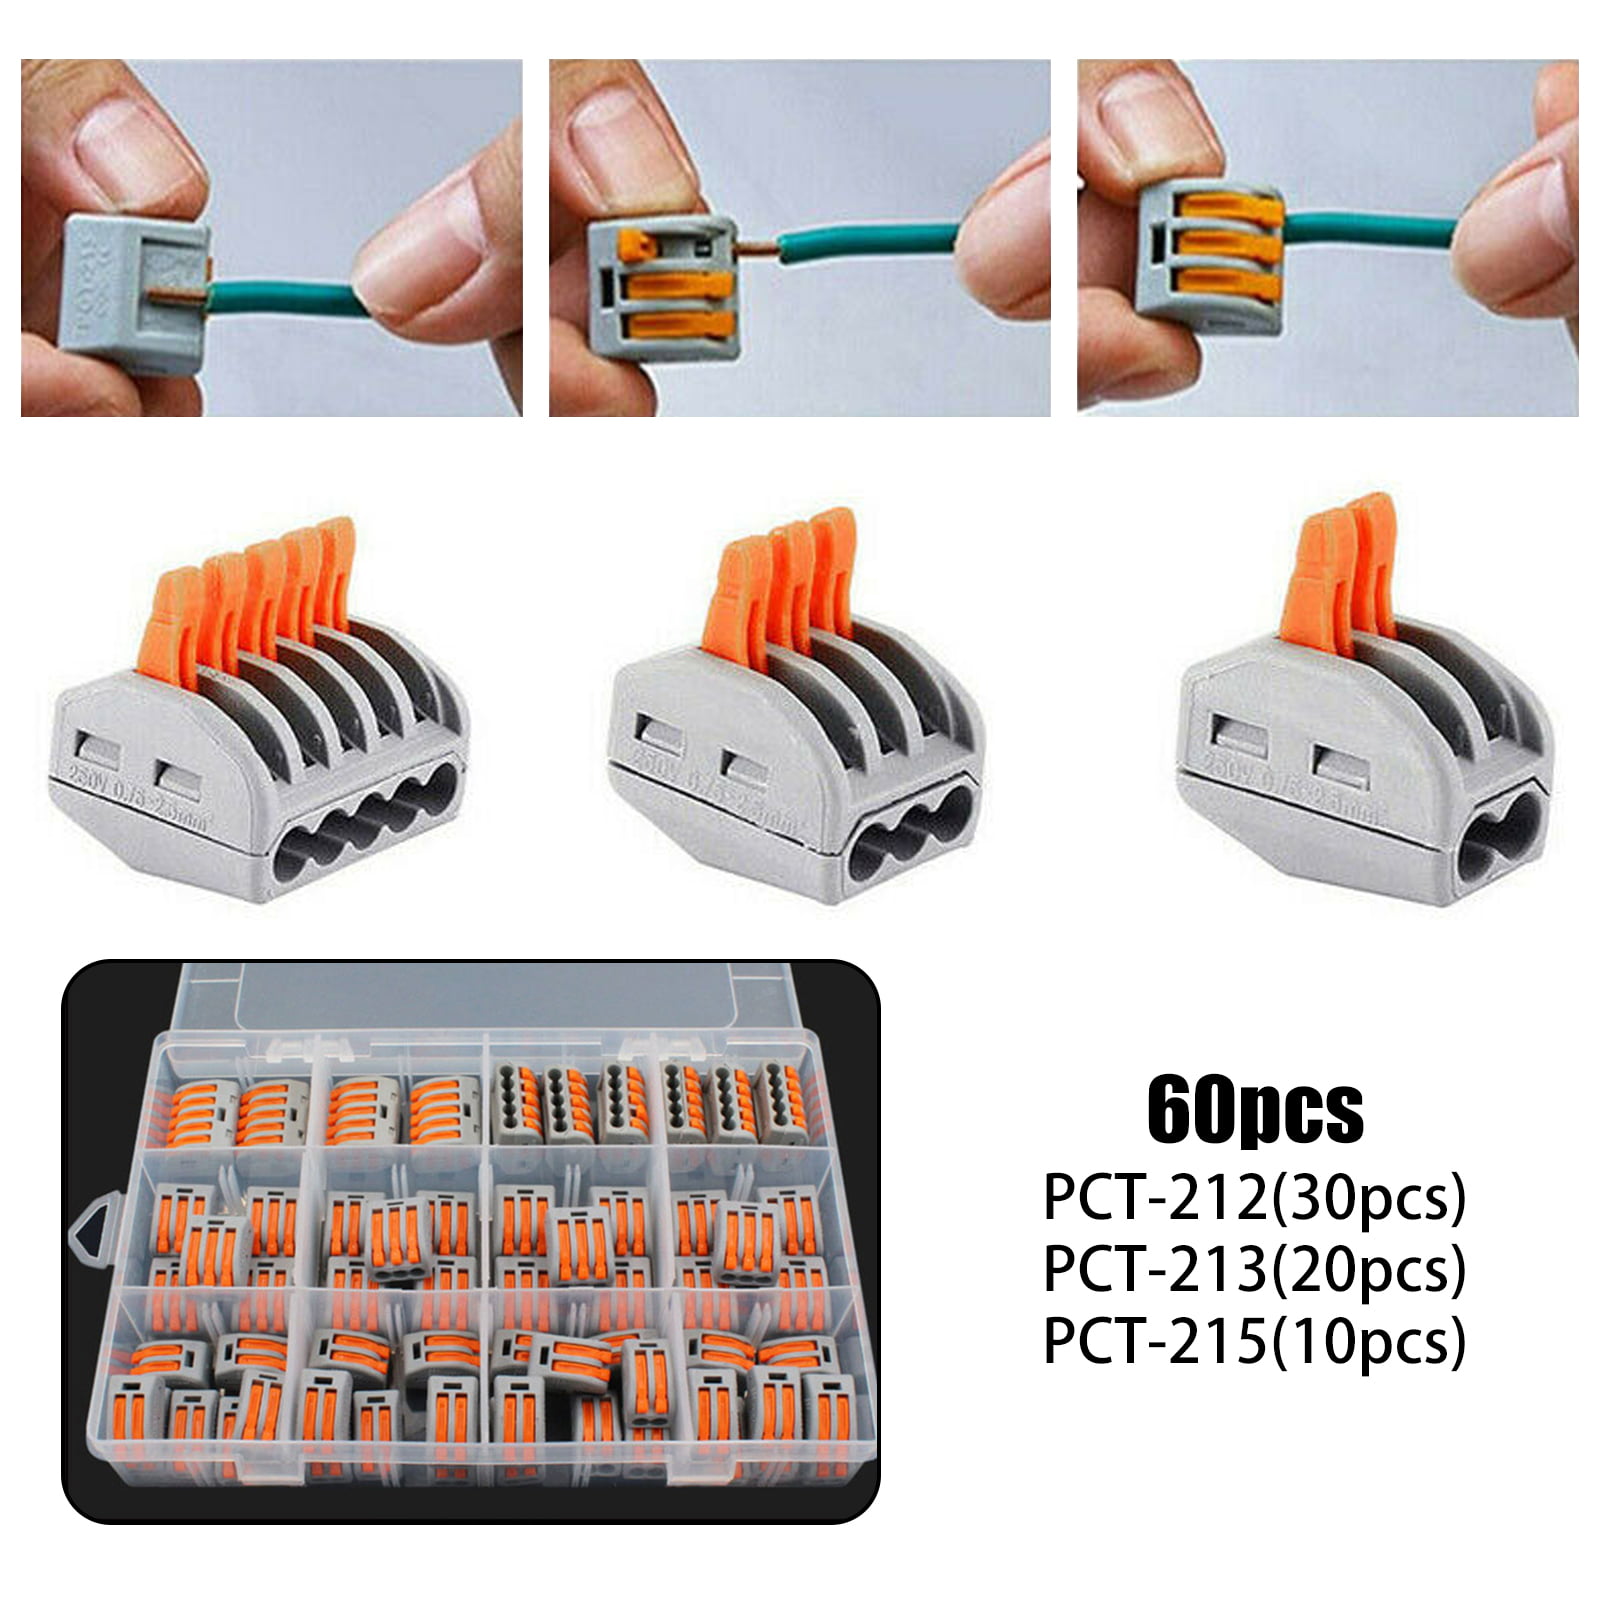 10pcs 5 Way Spring Lever Terminal Block Electric Cable Wire Connector PCT-215 